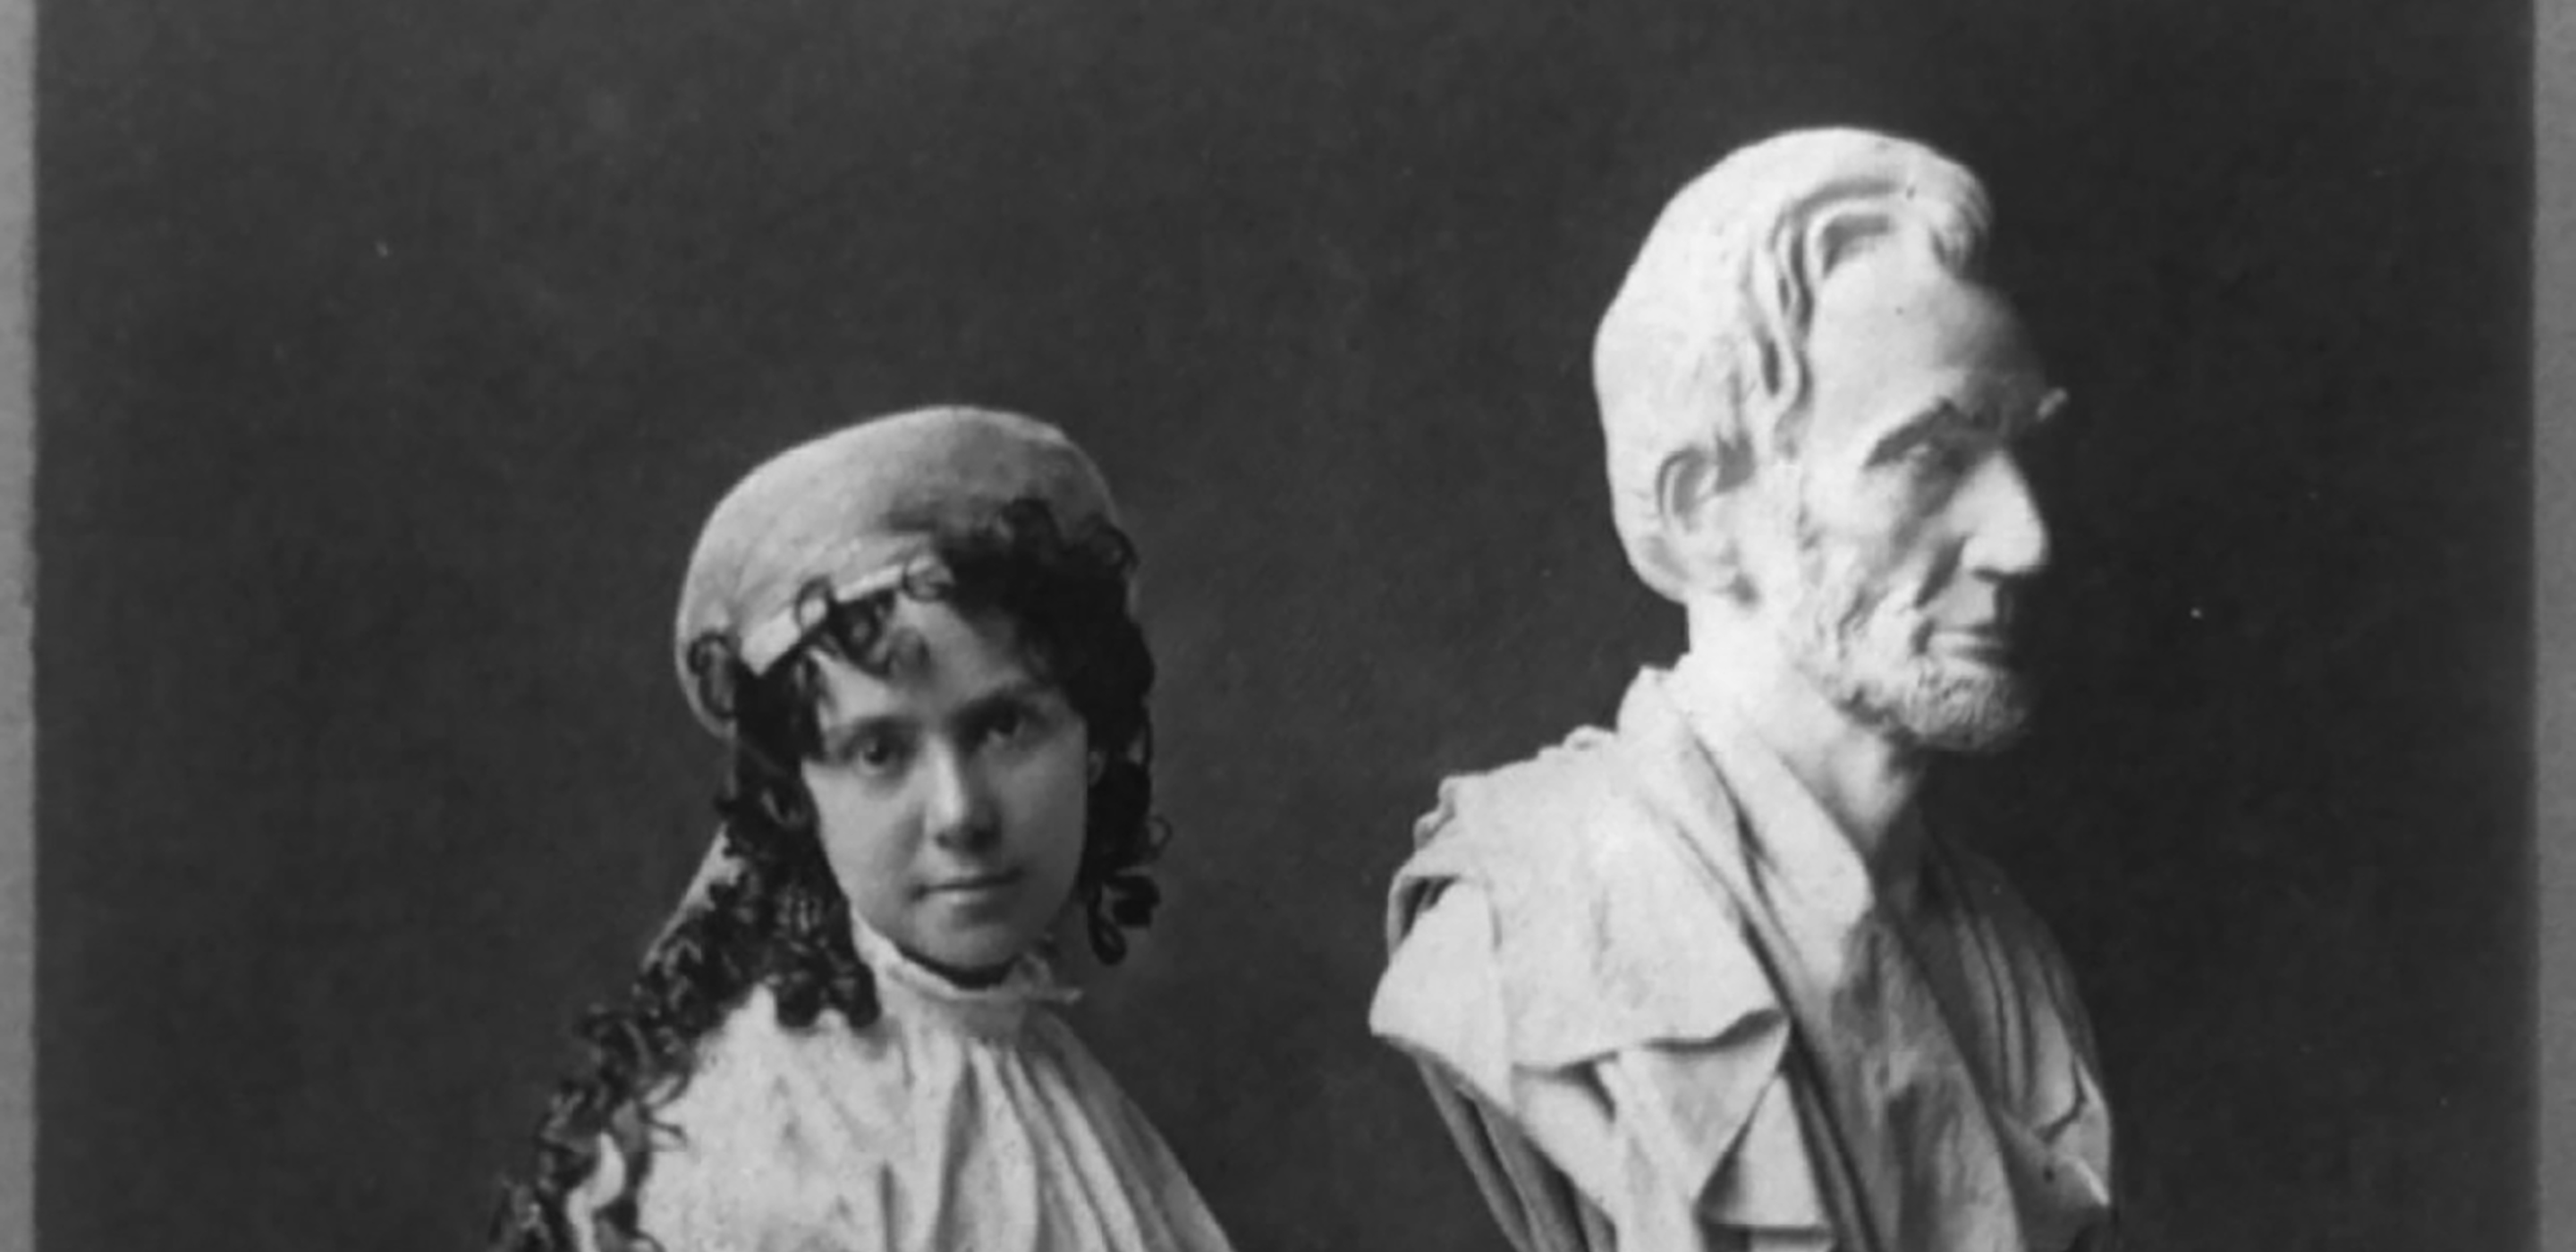 Black and white photograph of a woman in a white gown next to a bust of Abraham Lincoln.